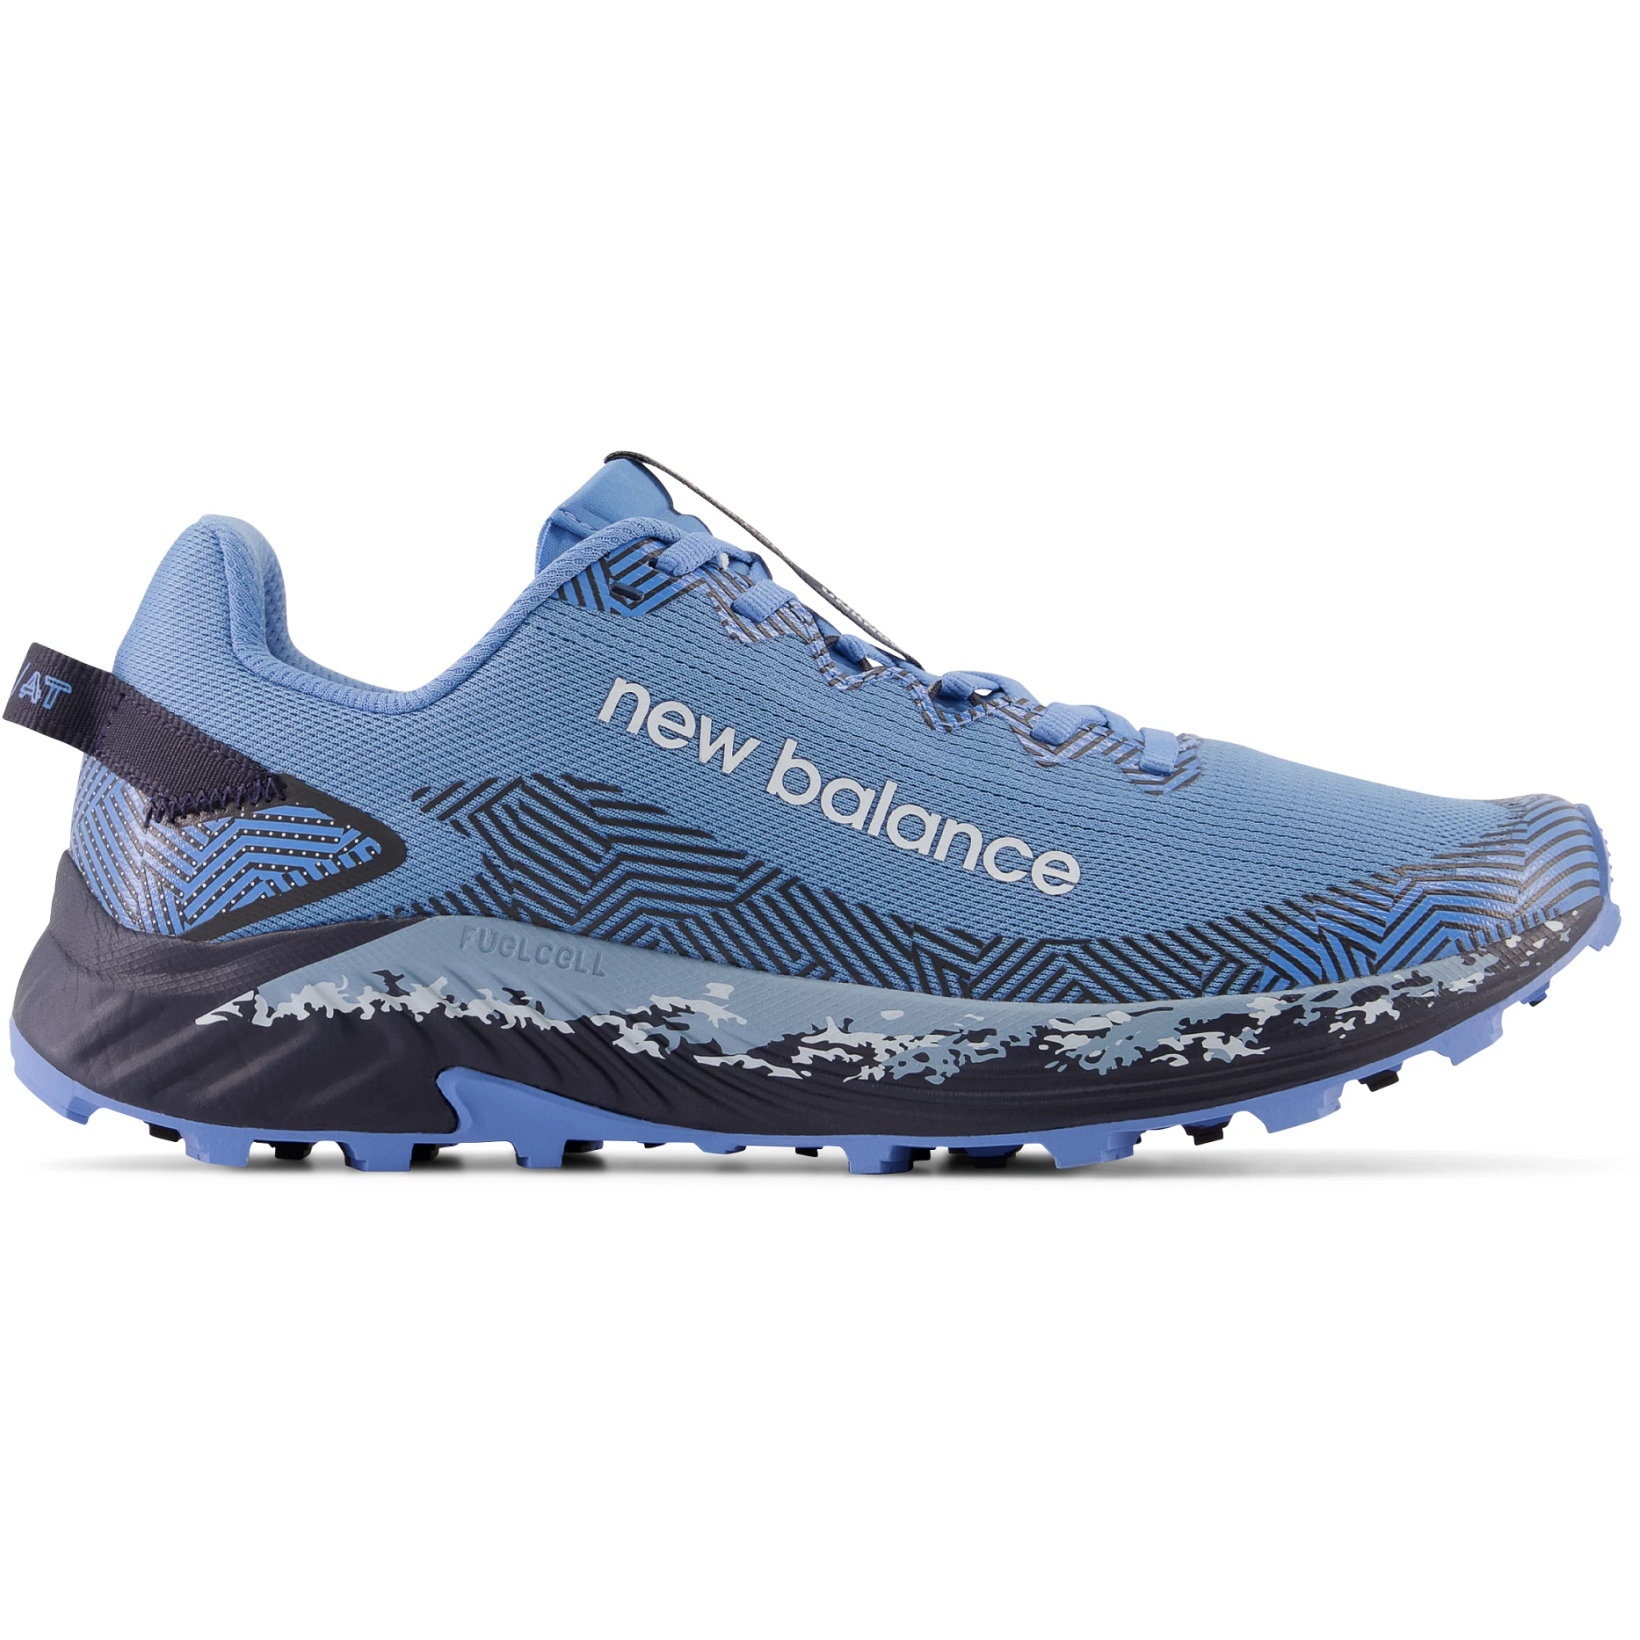 Image de New Balance Chaussures de Trailrunning - FuelCell Summit Unknown v4 - Blue/Eclipse